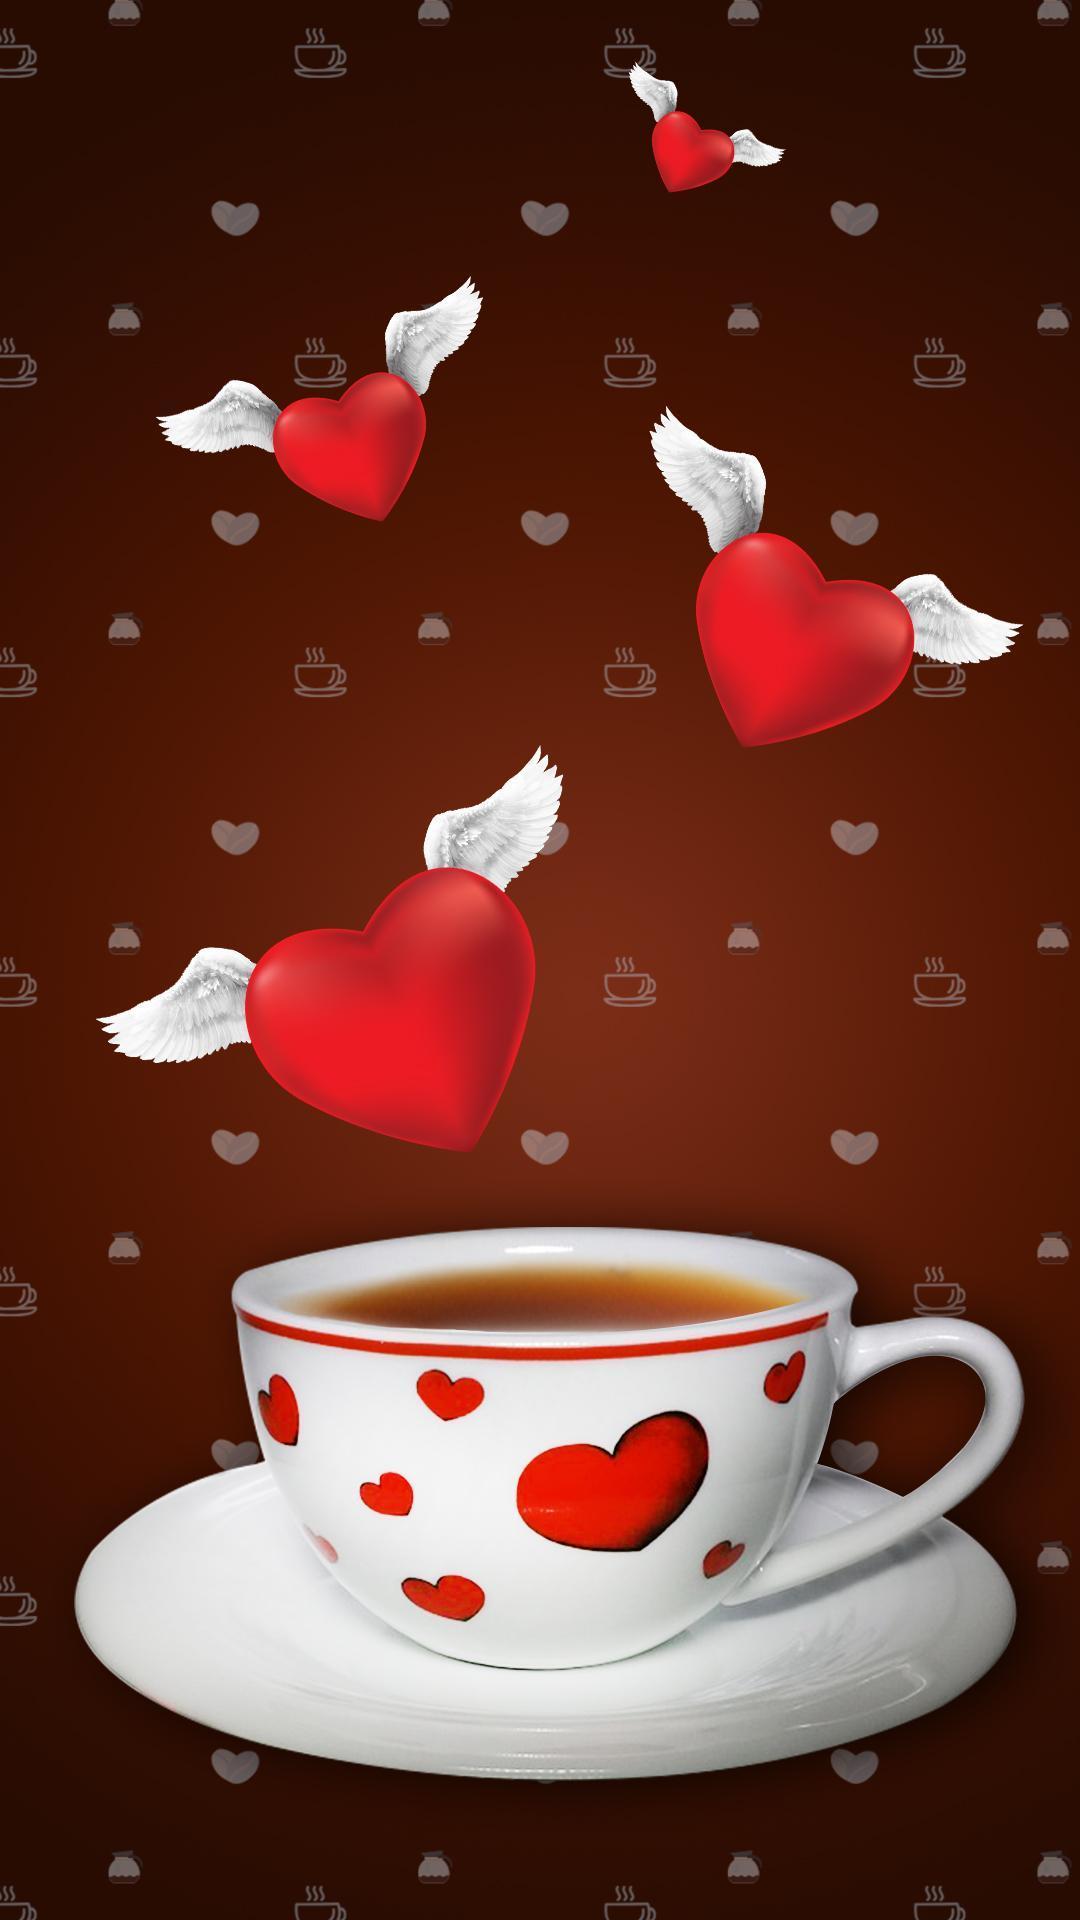 Coffee Love APUS Live Wallpaper for Android